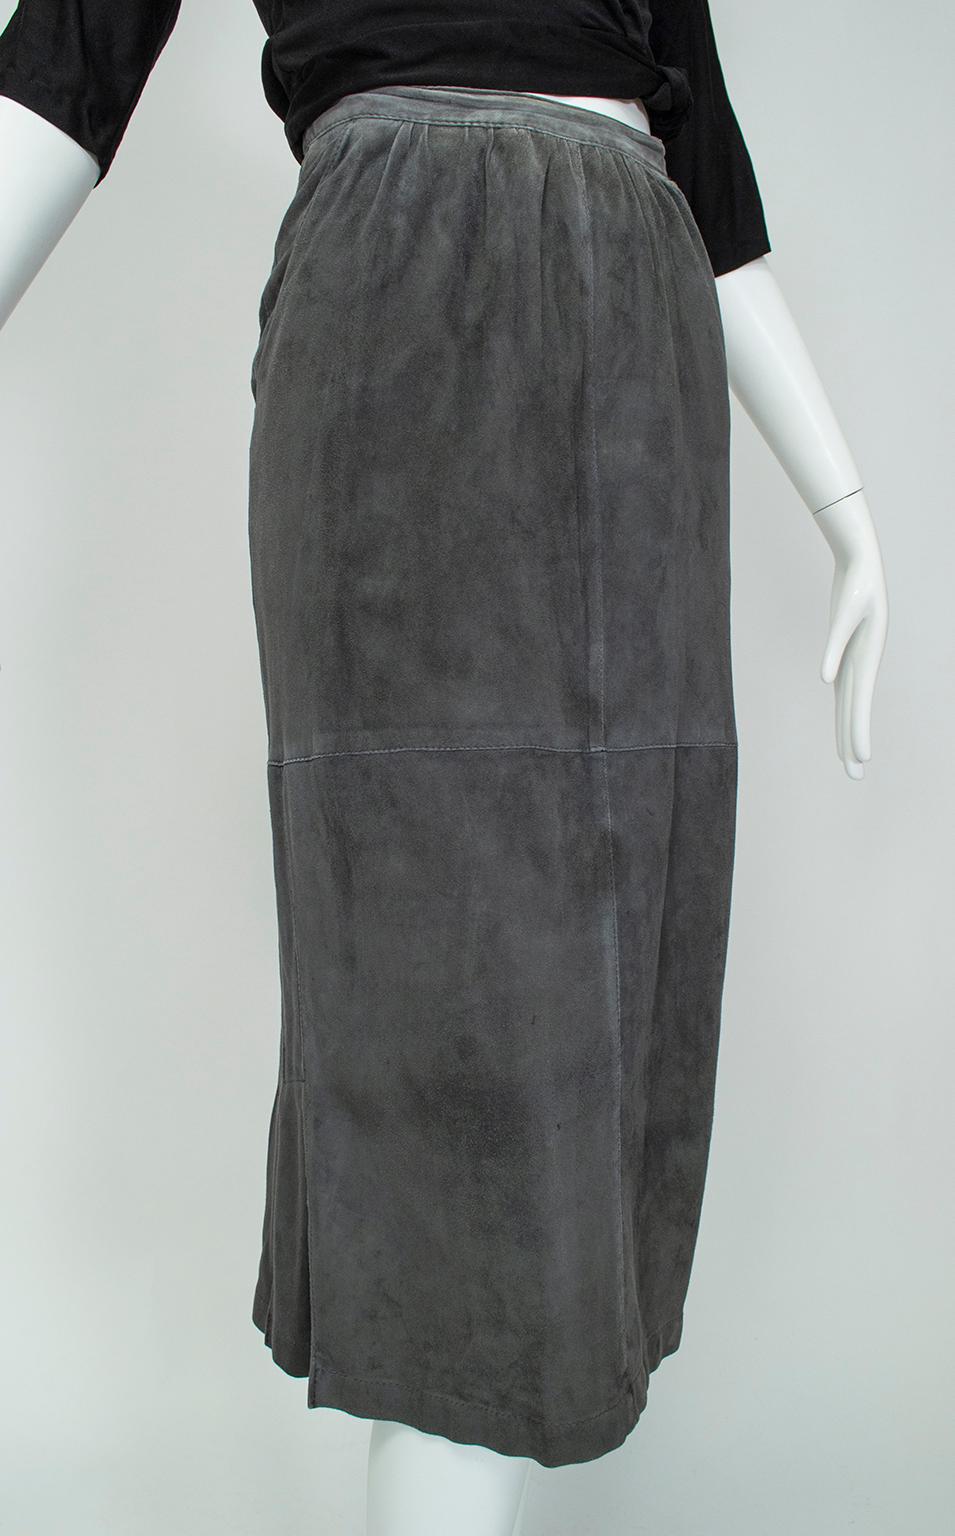 Minimalist Gianfranco Ferré Charcoal Gray Suede Midi Trumpet Skirt - S, 1980s In Good Condition For Sale In Tucson, AZ